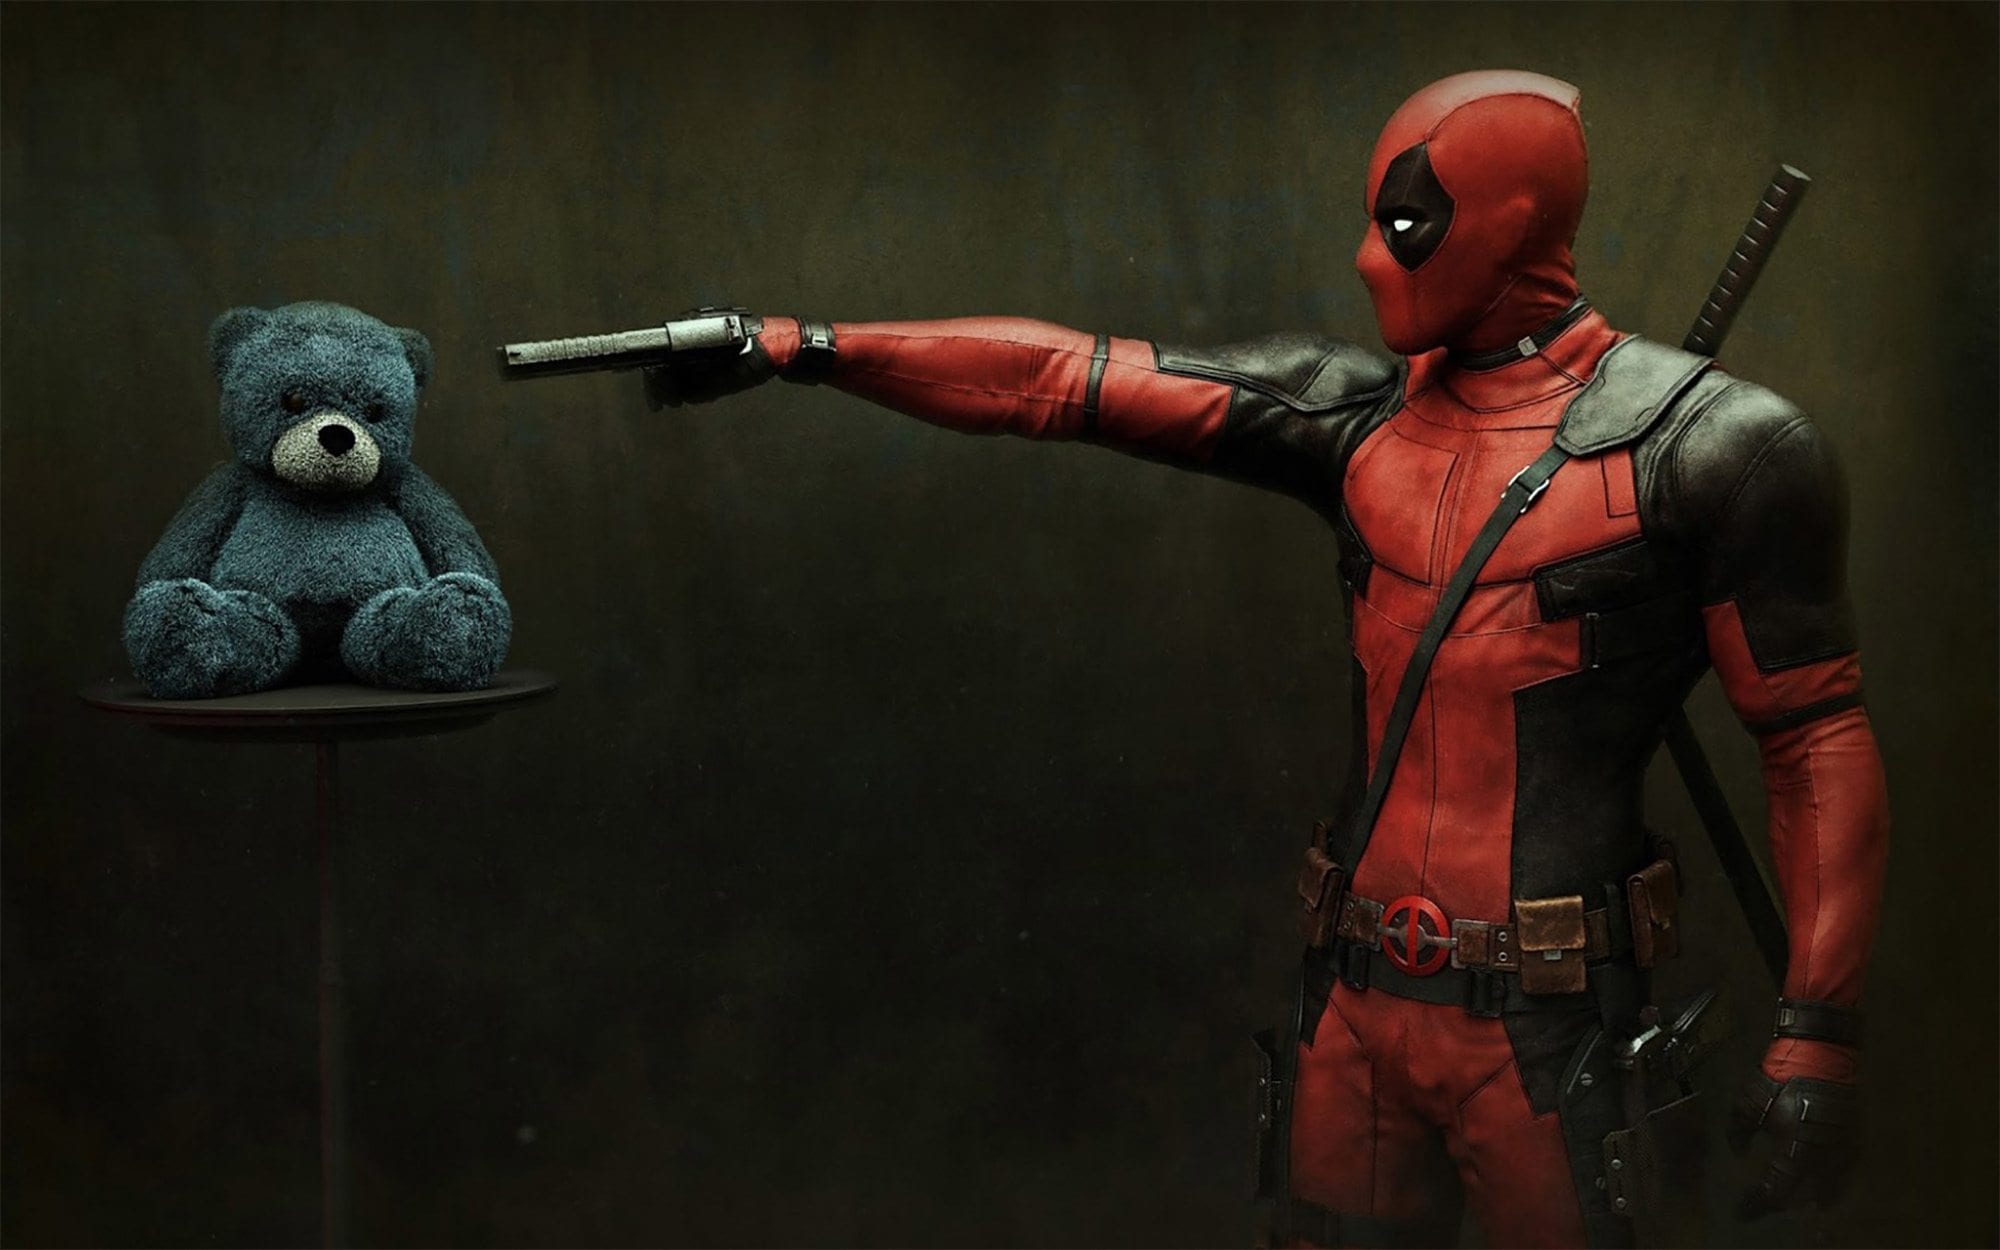 'Deadpool': the most innovative recent superhero film as well as a touchstone for a drained genre – here are all the reasons 'Deadpool' is just the worst.